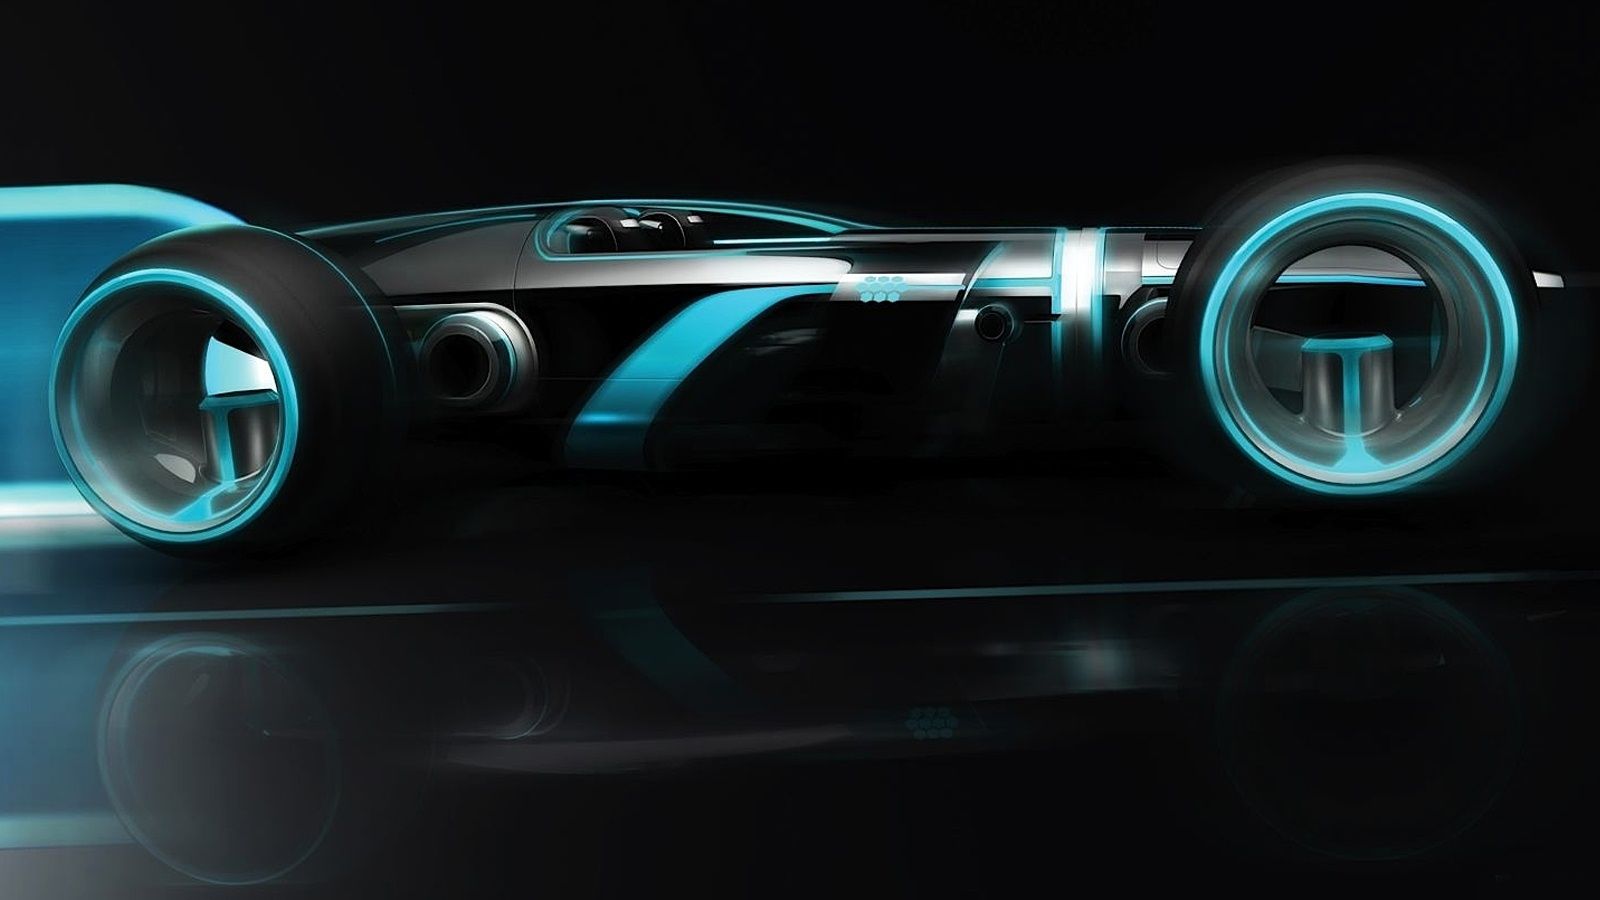 Tron Super Lightcycle HD Wallpapers HD Backgrounds